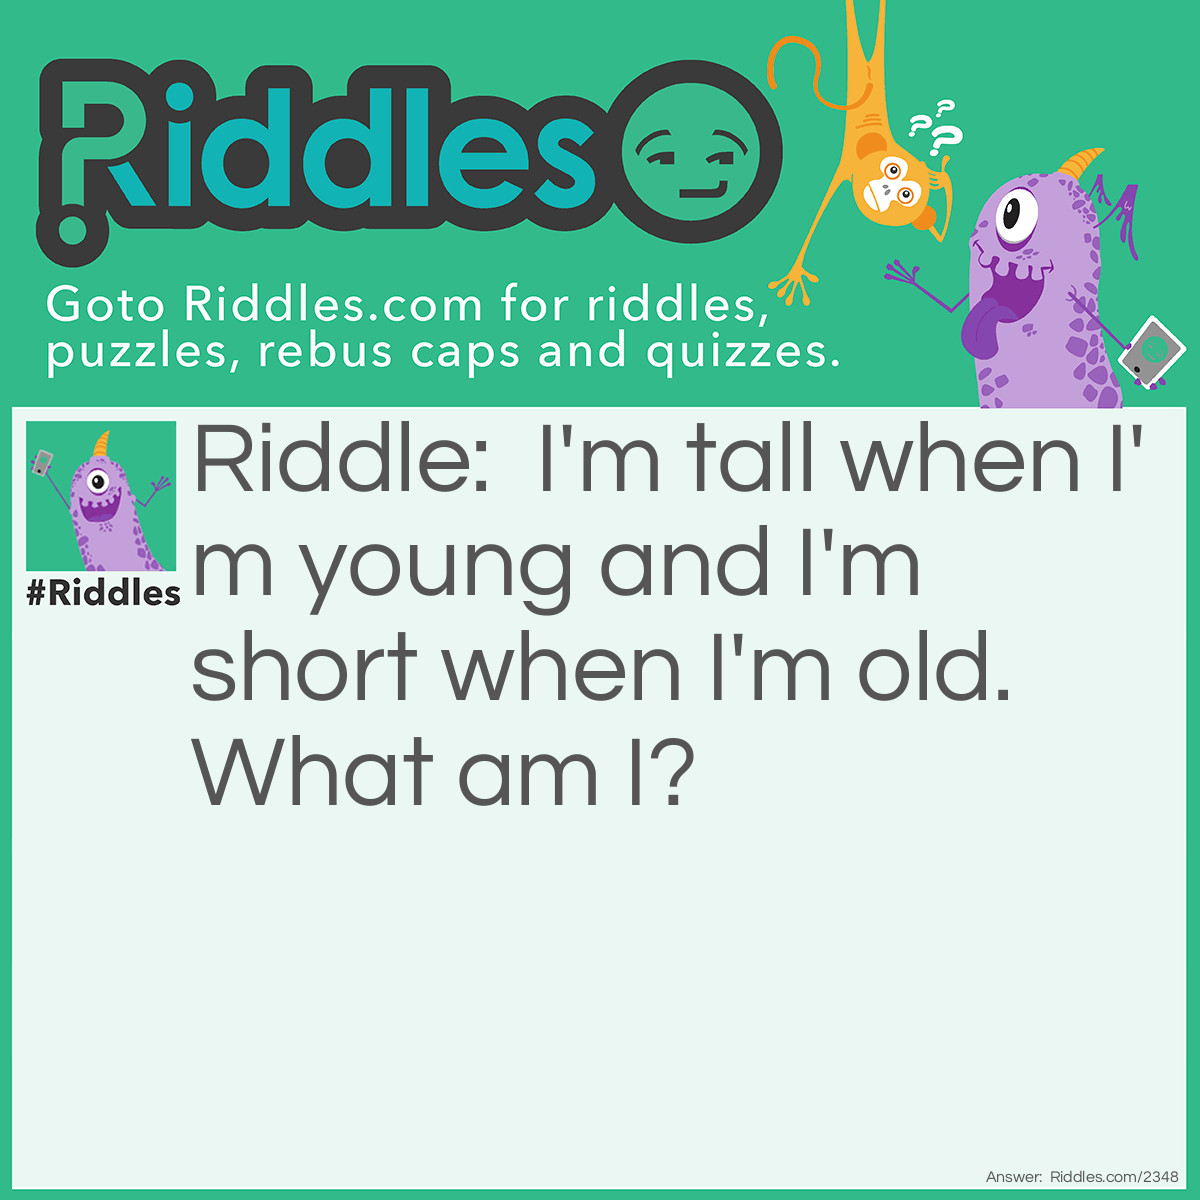 Riddle: I'm tall when I'm young and I'm short when I'm old. What am I? Answer: Candle or Pencil.